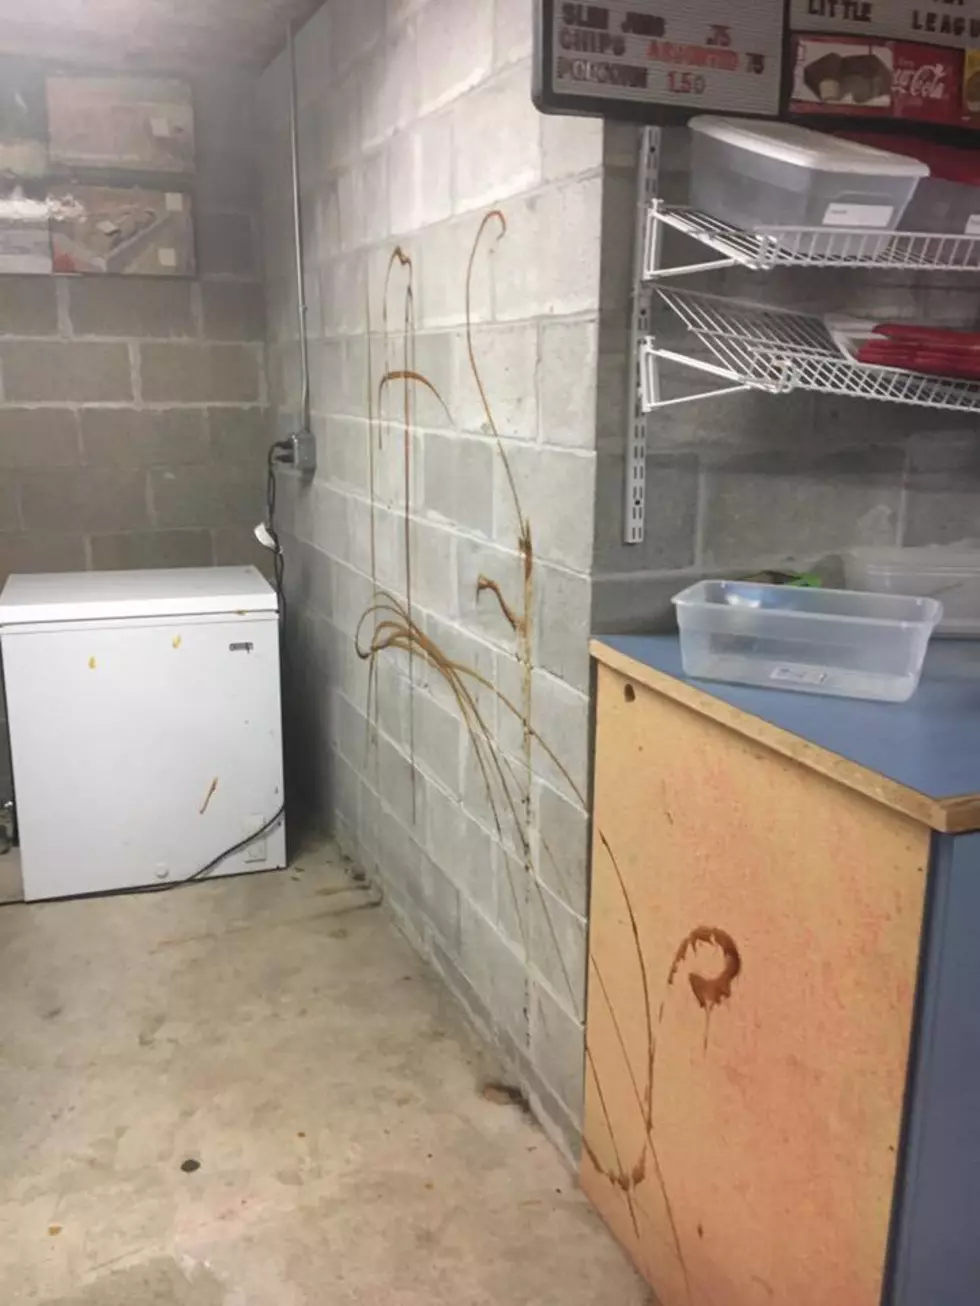 Oriskany Little League Concession Stand Vandalized with Feces